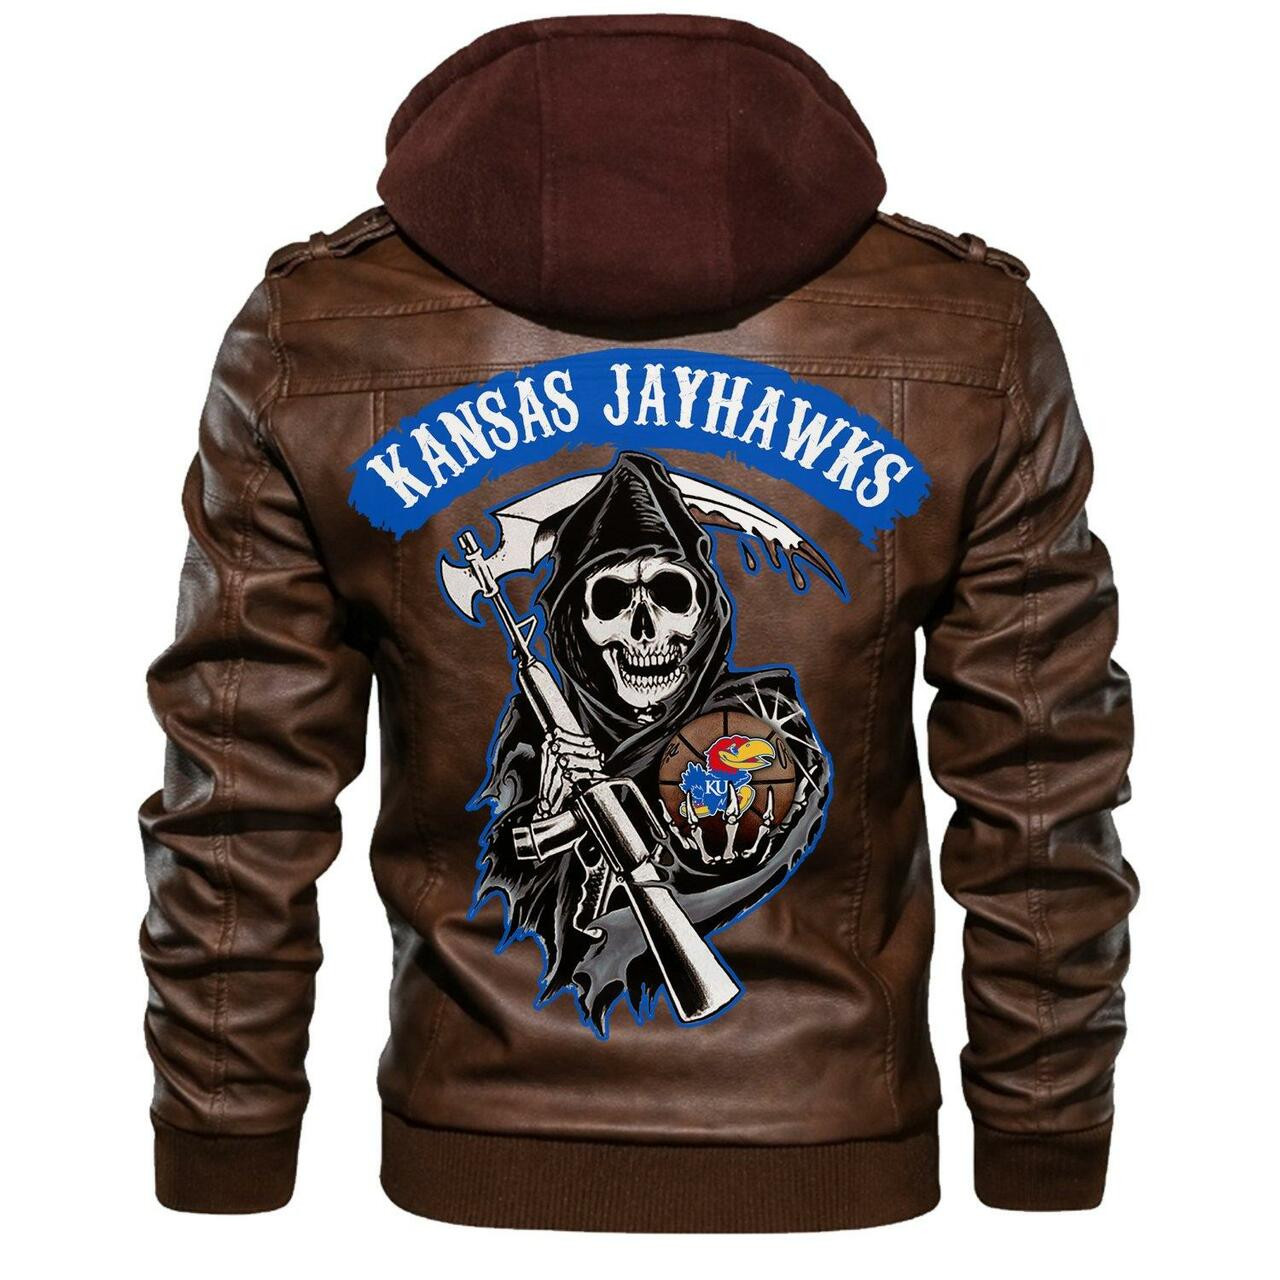 Check out and find the right leather jacket below 205